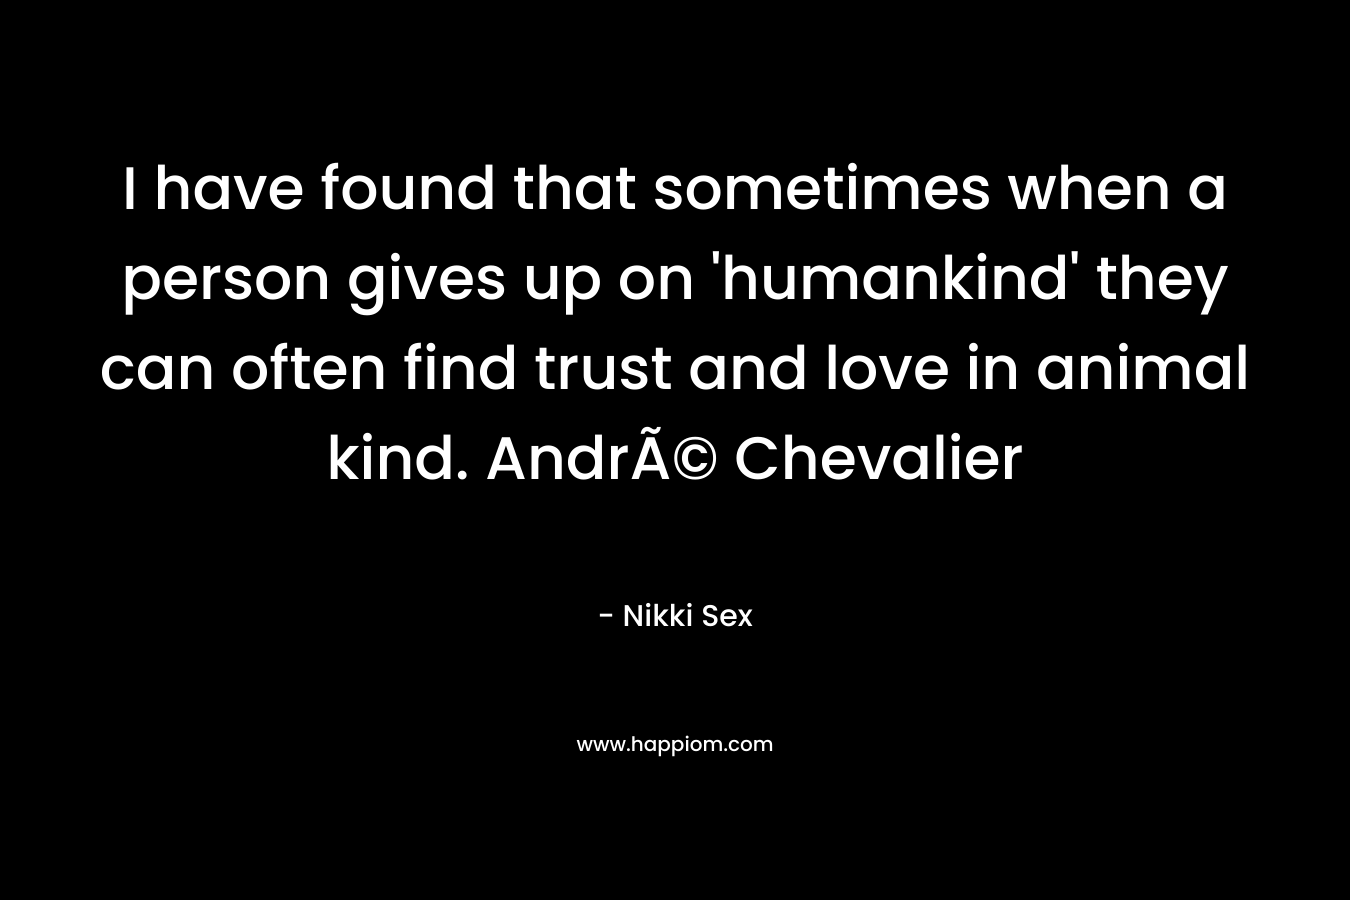 I have found that sometimes when a person gives up on 'humankind' they can often find trust and love in animal kind. AndrÃ© Chevalier